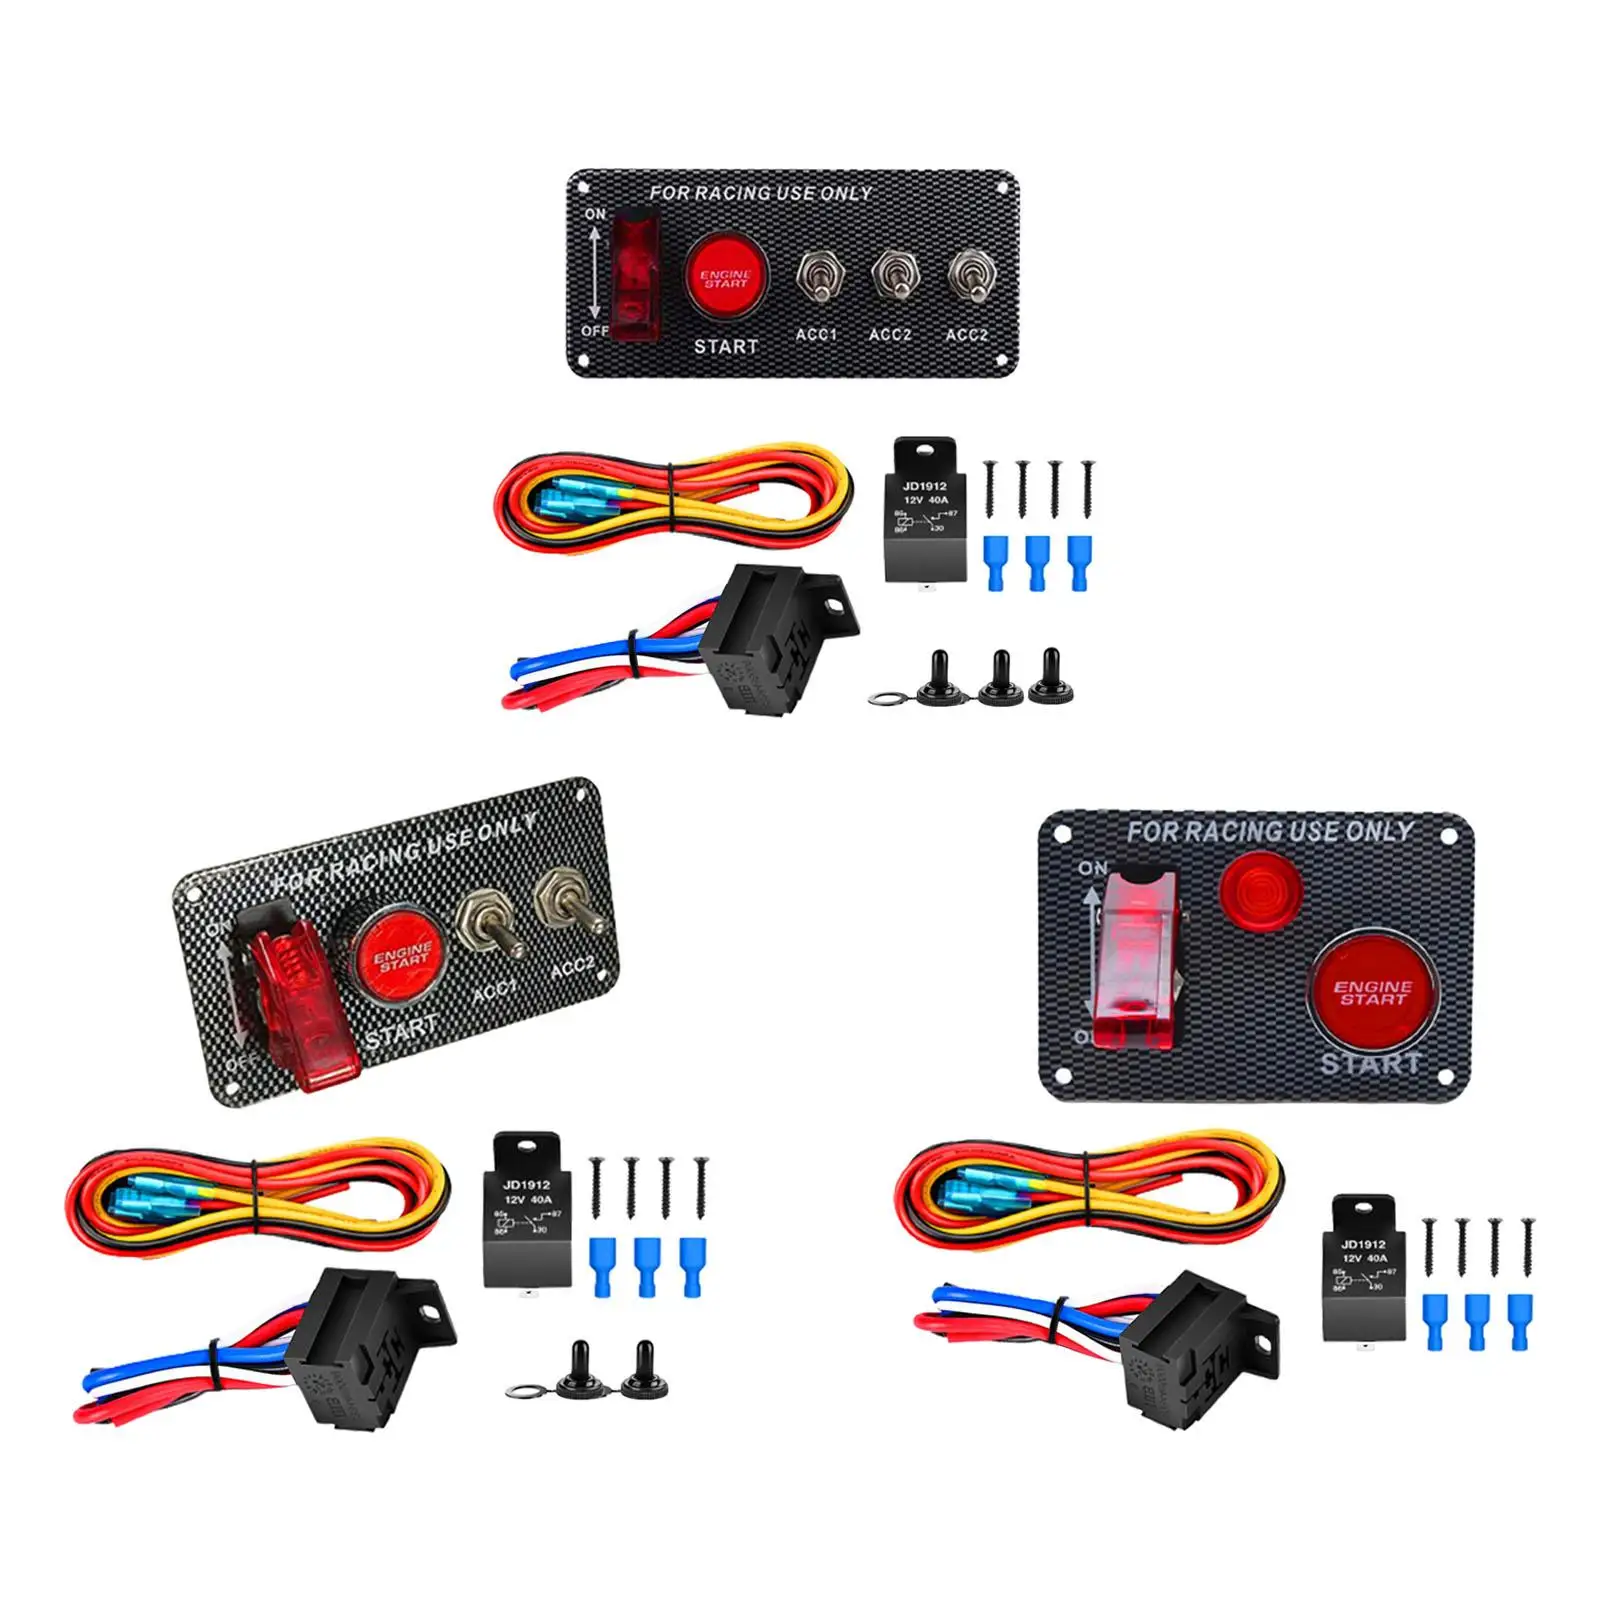 12V Ignition Switch Panel Replacements for 12V Racing Vehicle Yachts